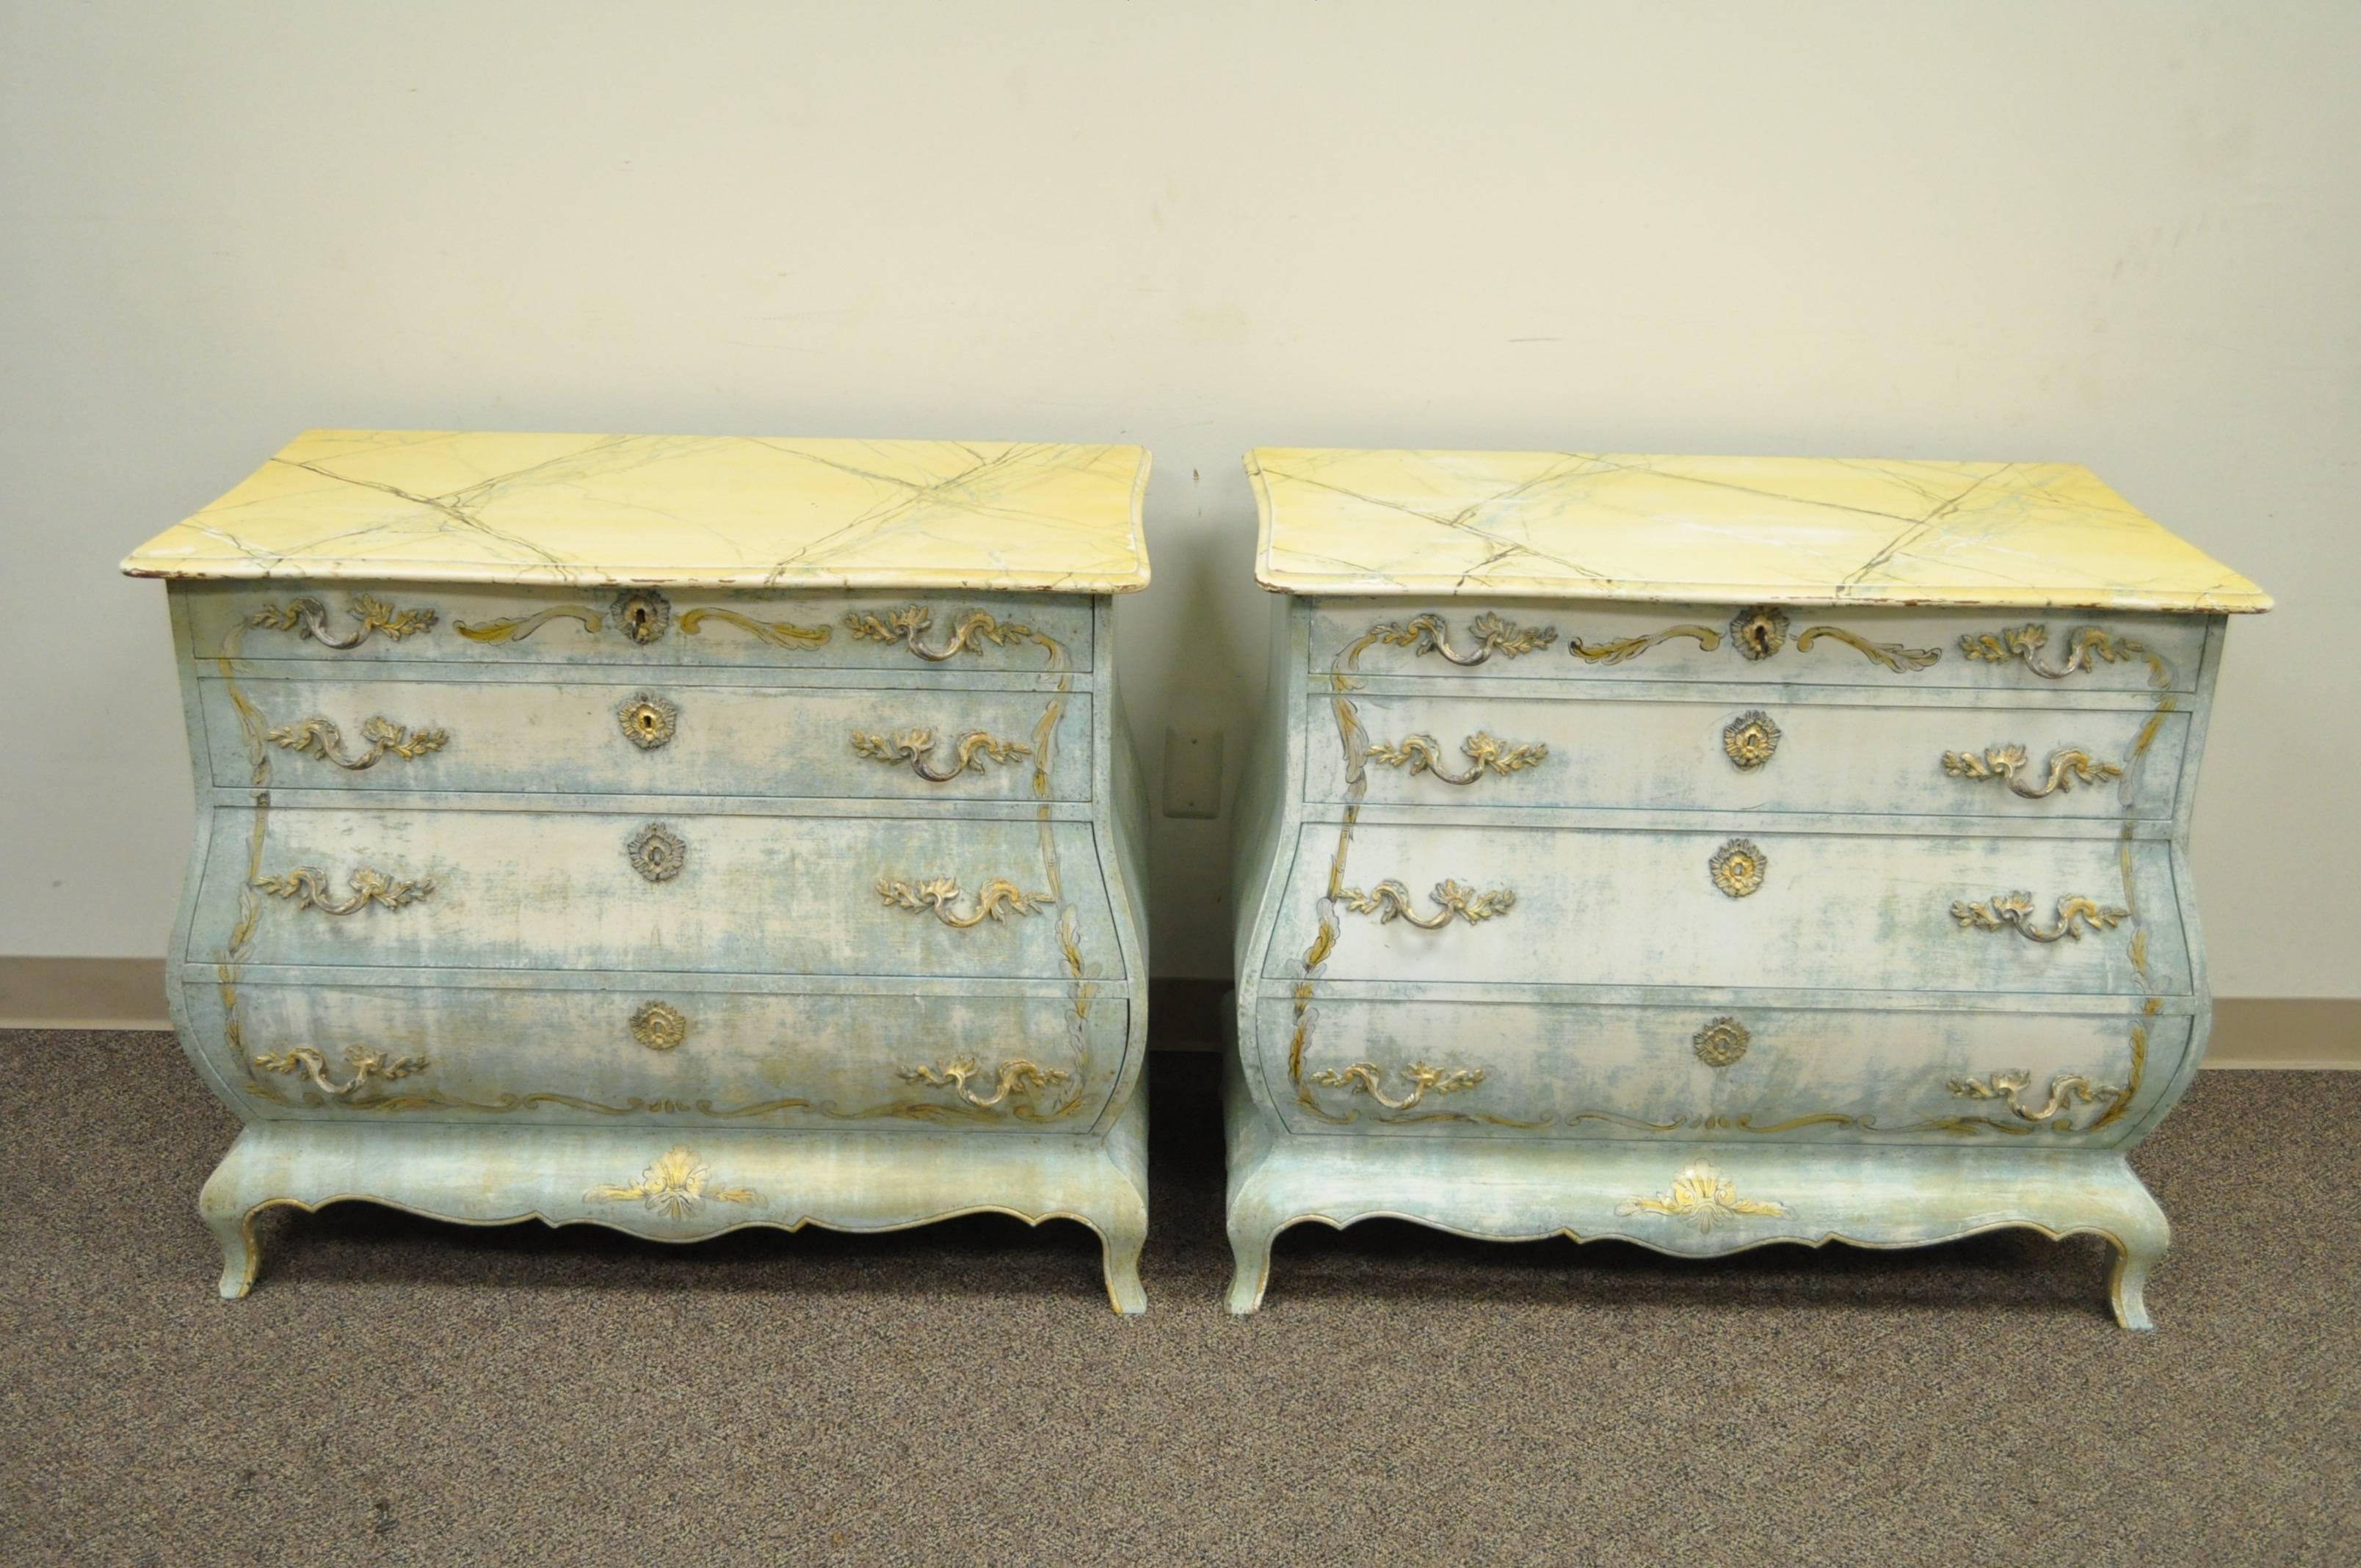 Impressive pair of vintage French Louis XV style bombe form commodes or bachelor chests. The pair features ornate brass hardware, faux marble painted tops, curvaceous bombe form, four drawers each, finished backs and an attractive blue washed /